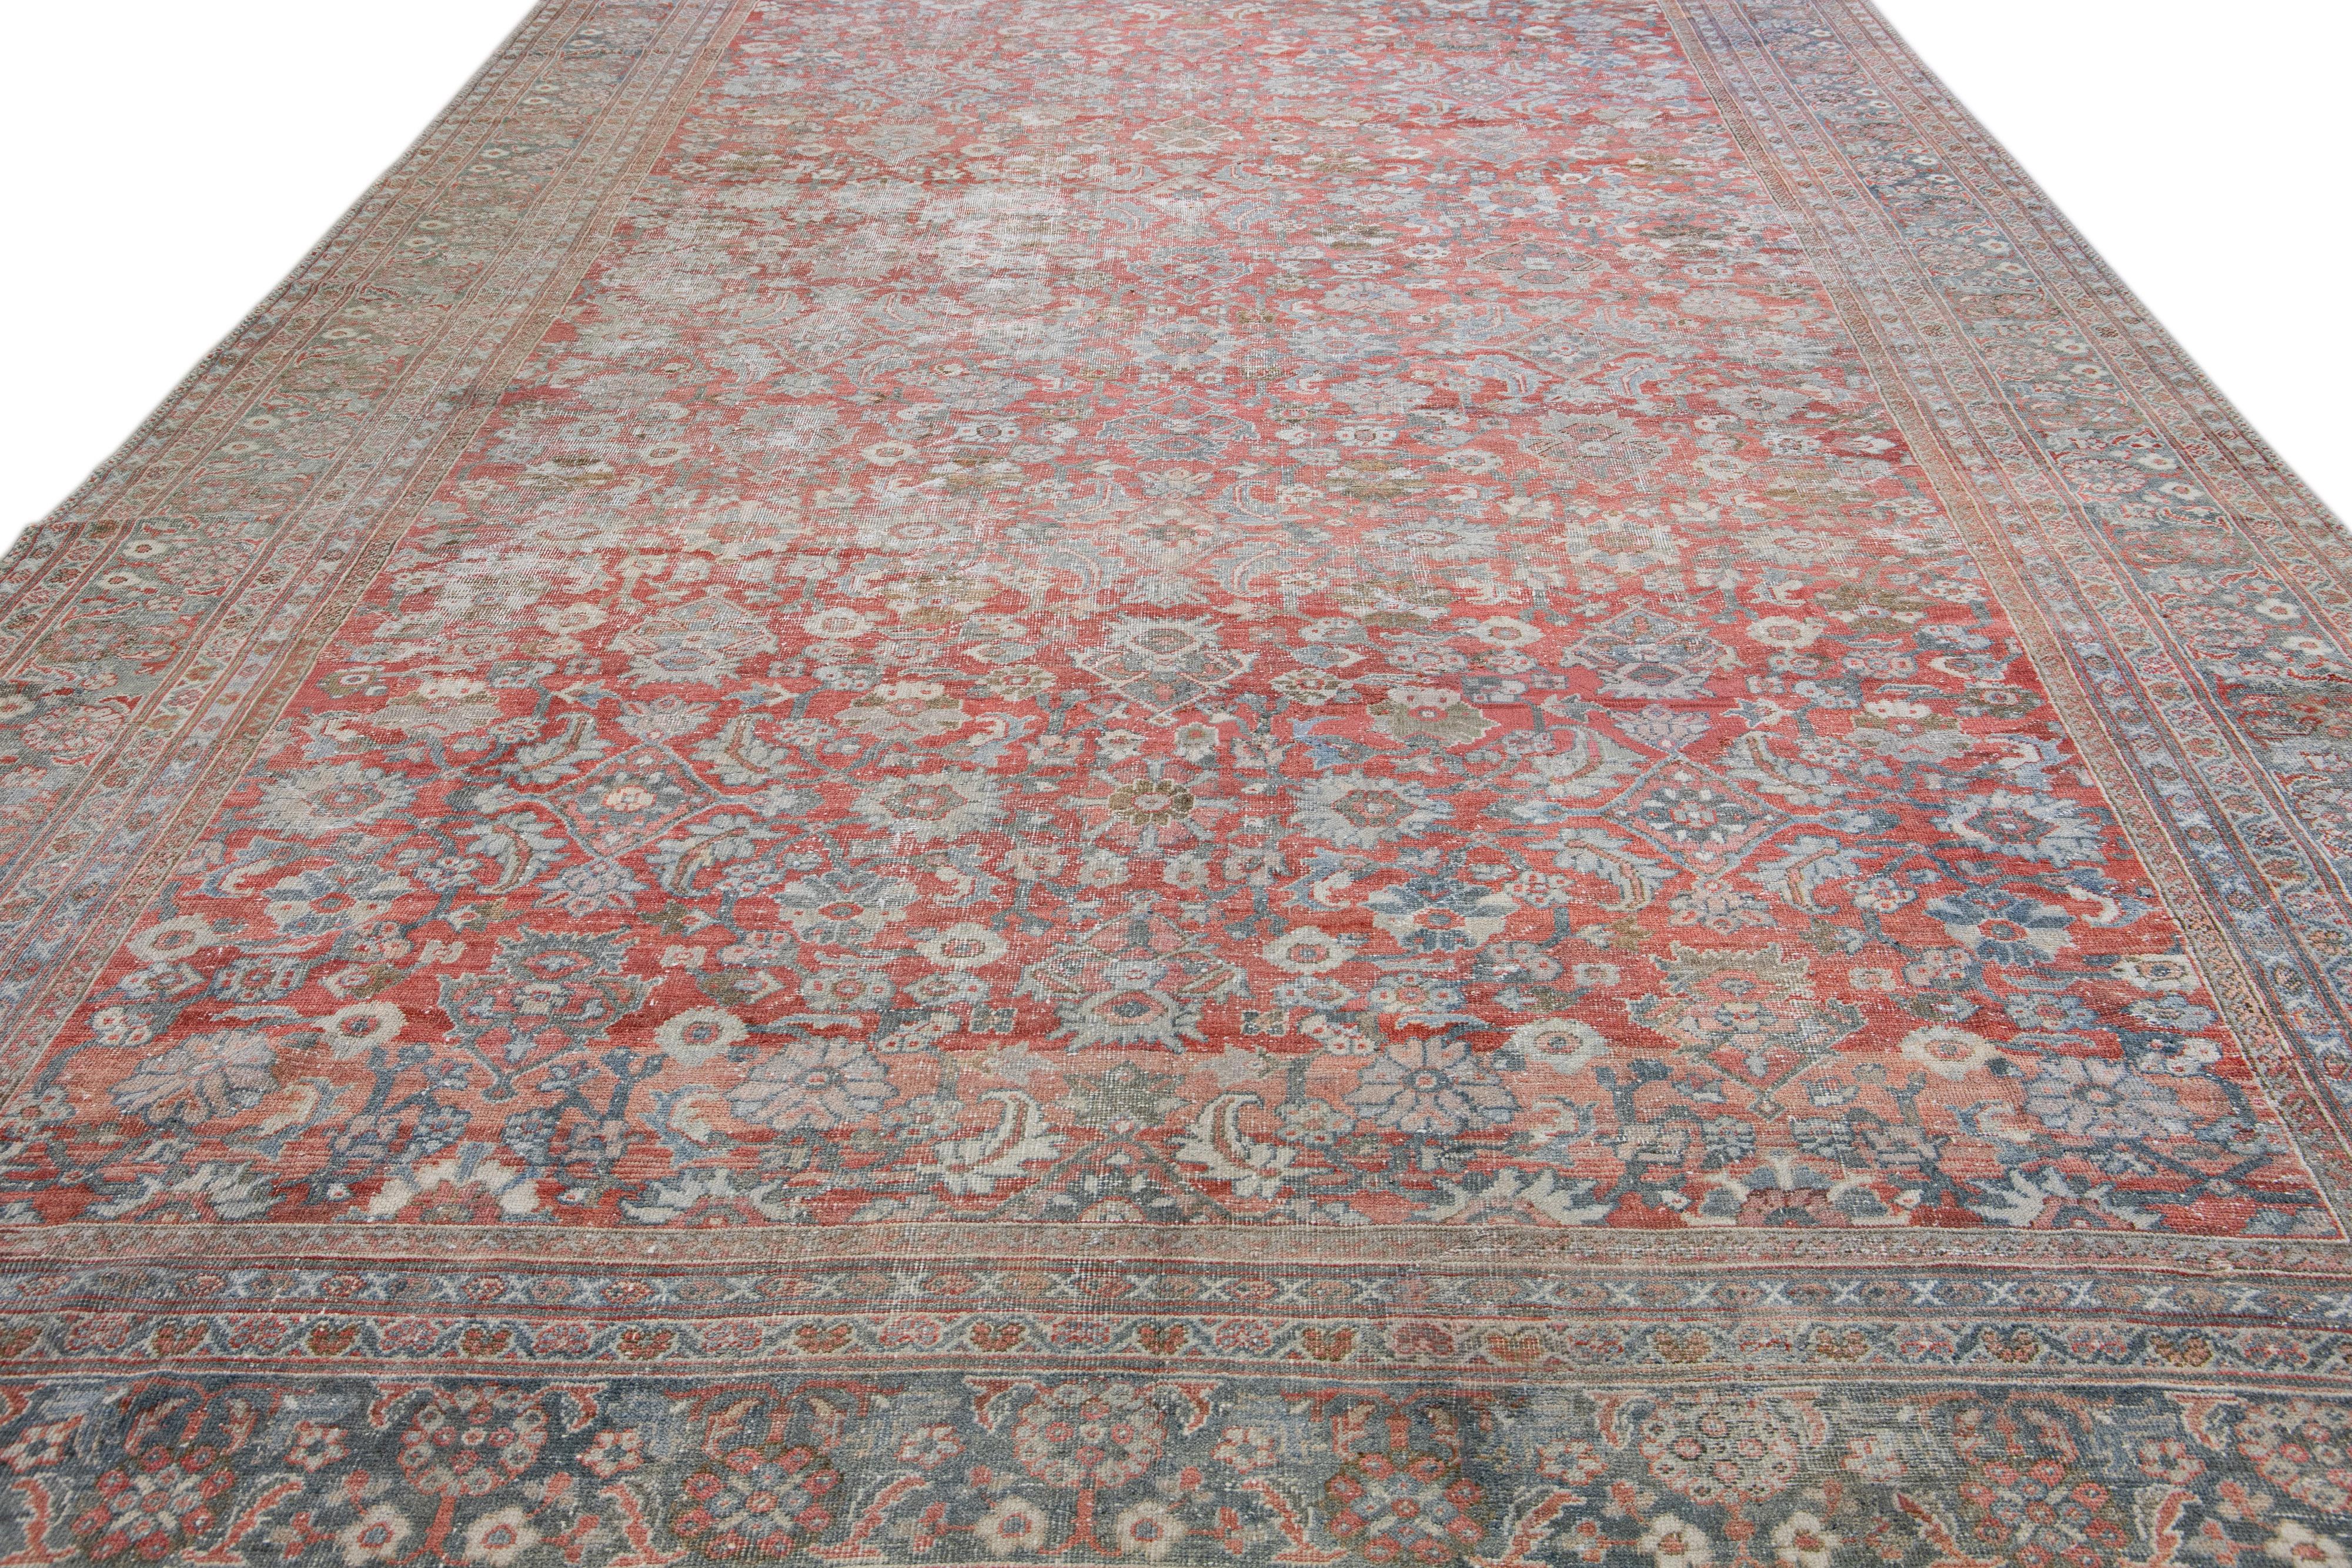 Islamic Antique Mahal Handmade Oversize Red Wool Rug with Allover Design For Sale